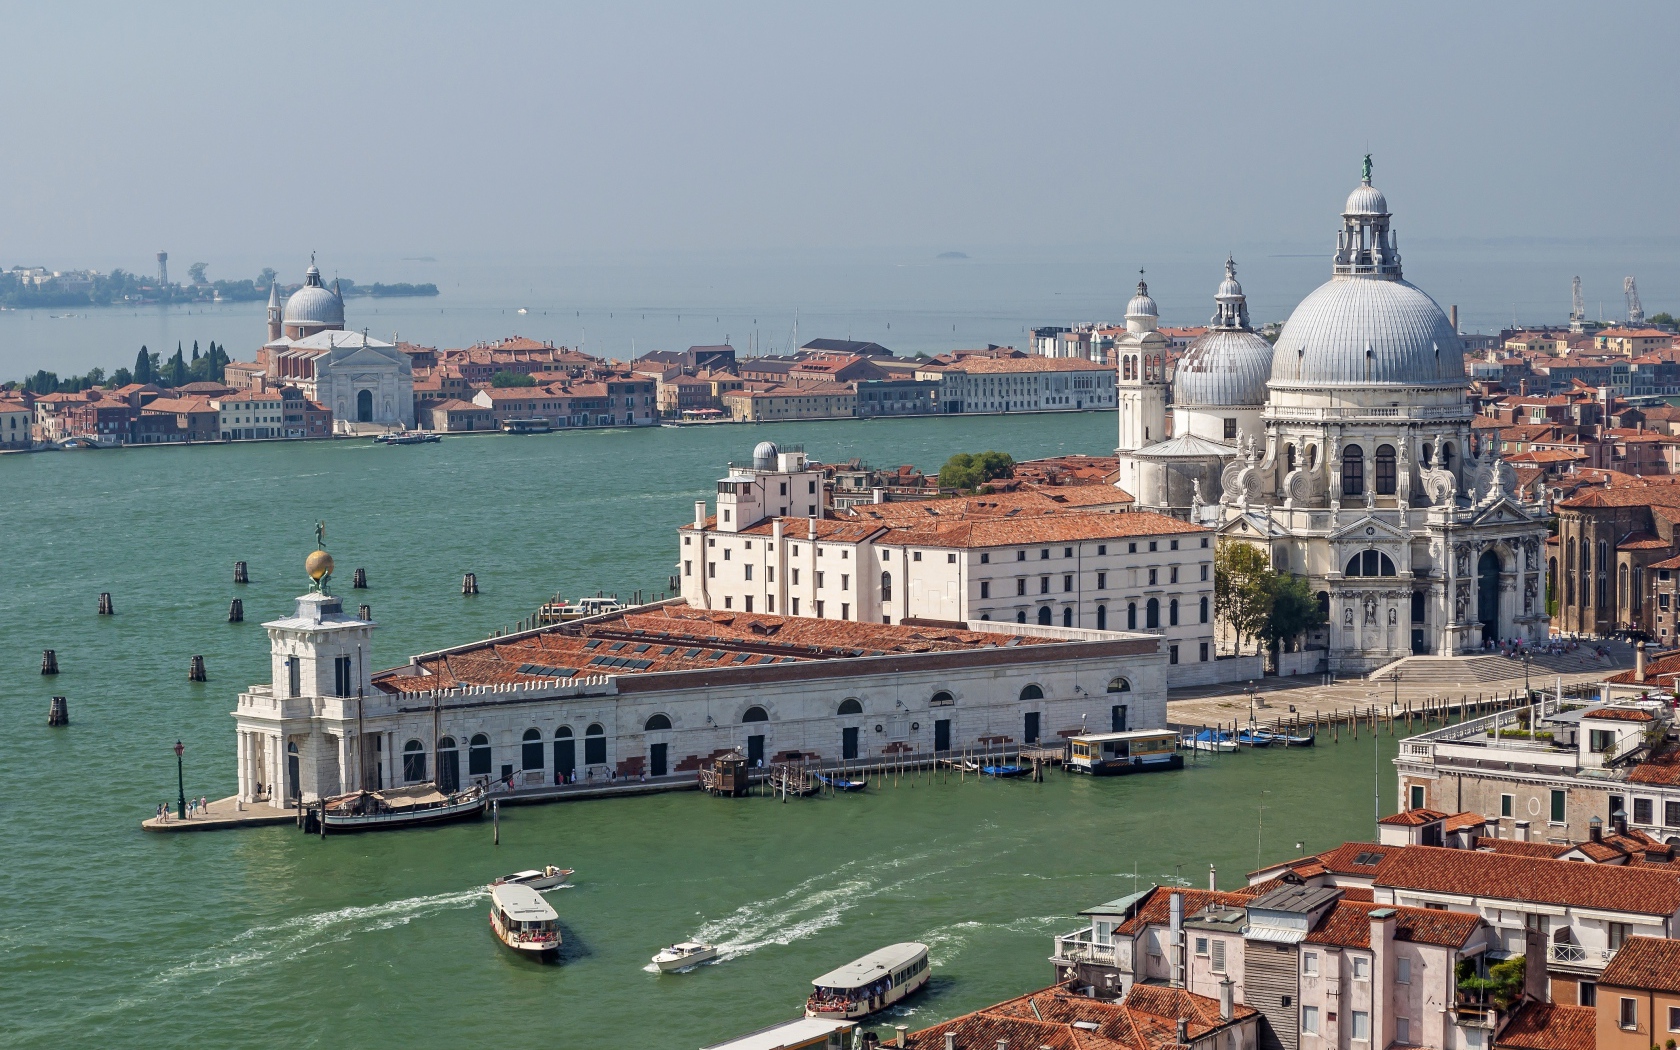 View of the Cathedral of Santa Maria della Salute on the Grand Canal, Venice. Italy